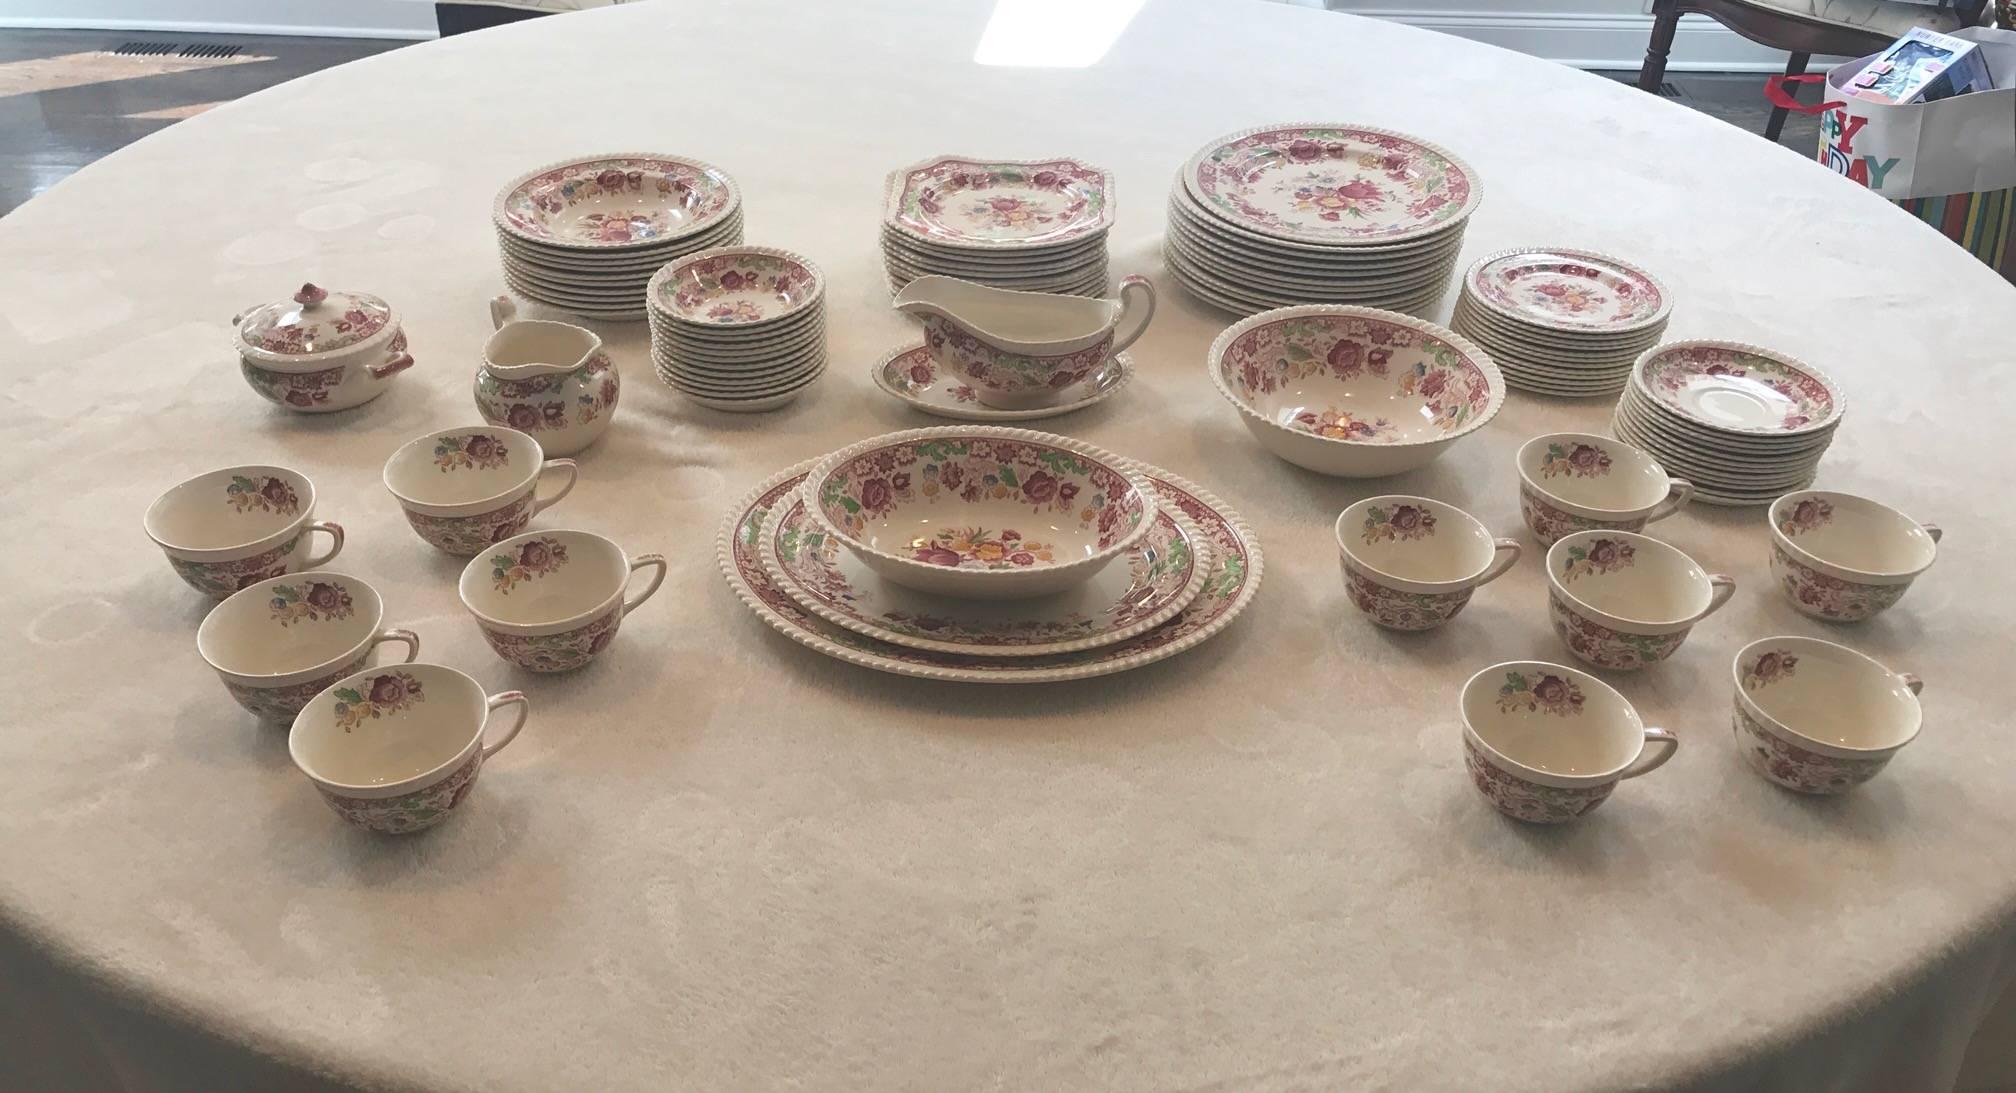 Holiday! Serving for 12 Winchester Johnson Bros made in England China set. Beautiful design -
great colors! Hand engraved. Perfect for the holiday's! 

Everything has 12 except for 11 cups, 10 big bowls.